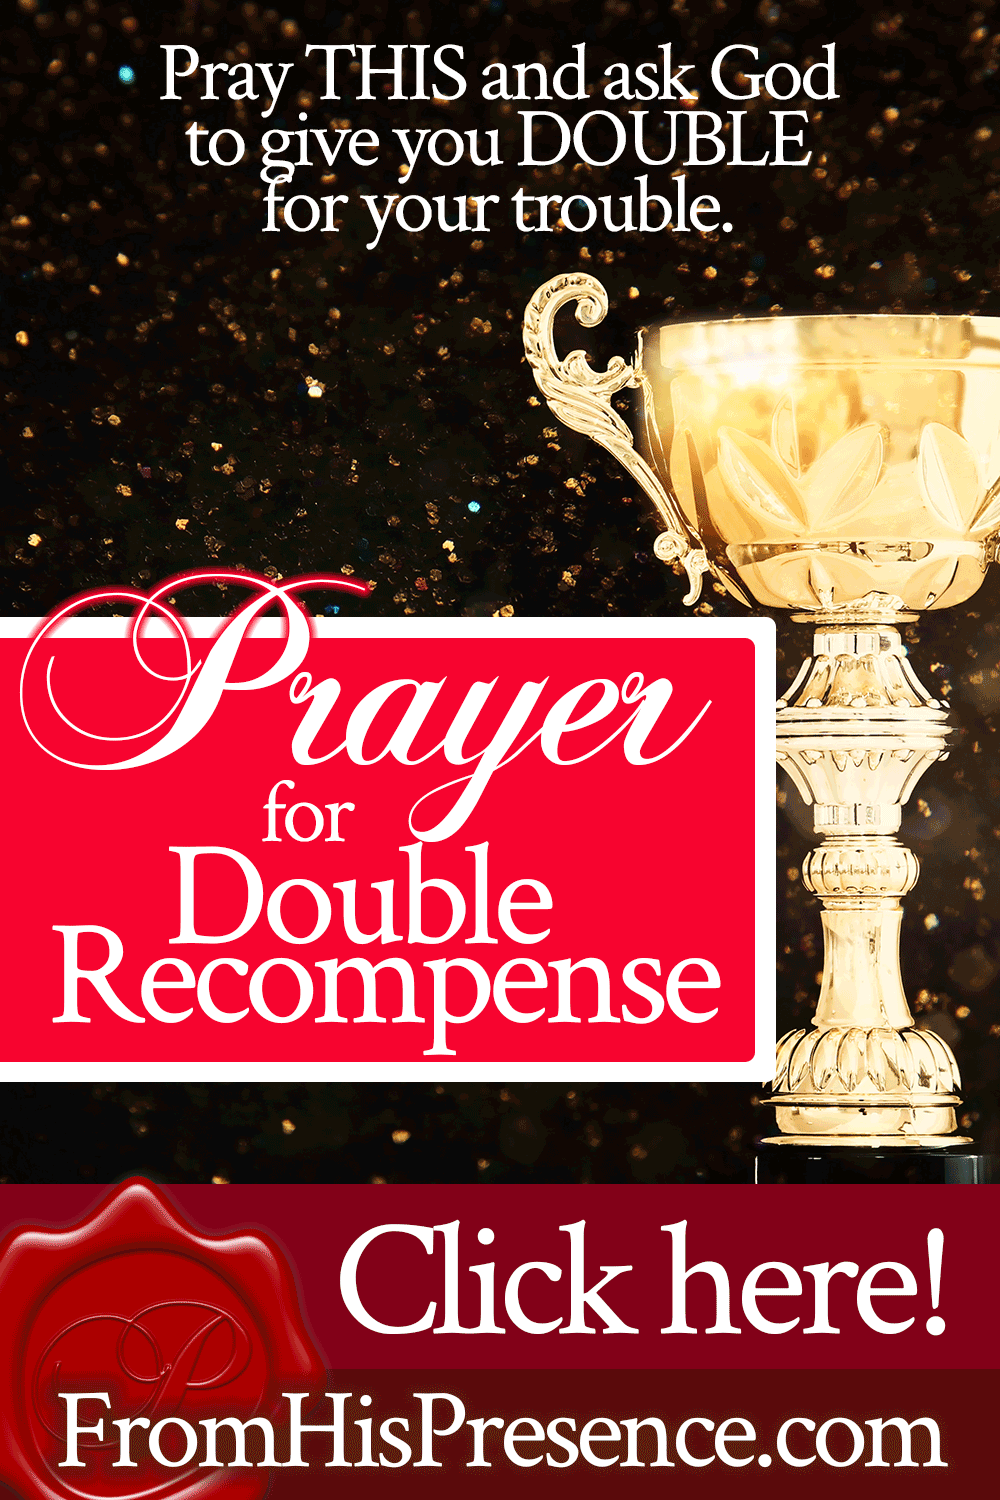 Prayer for Double Recompense | Prayer by Jamie Rohrbaugh | FromHisPresence.com